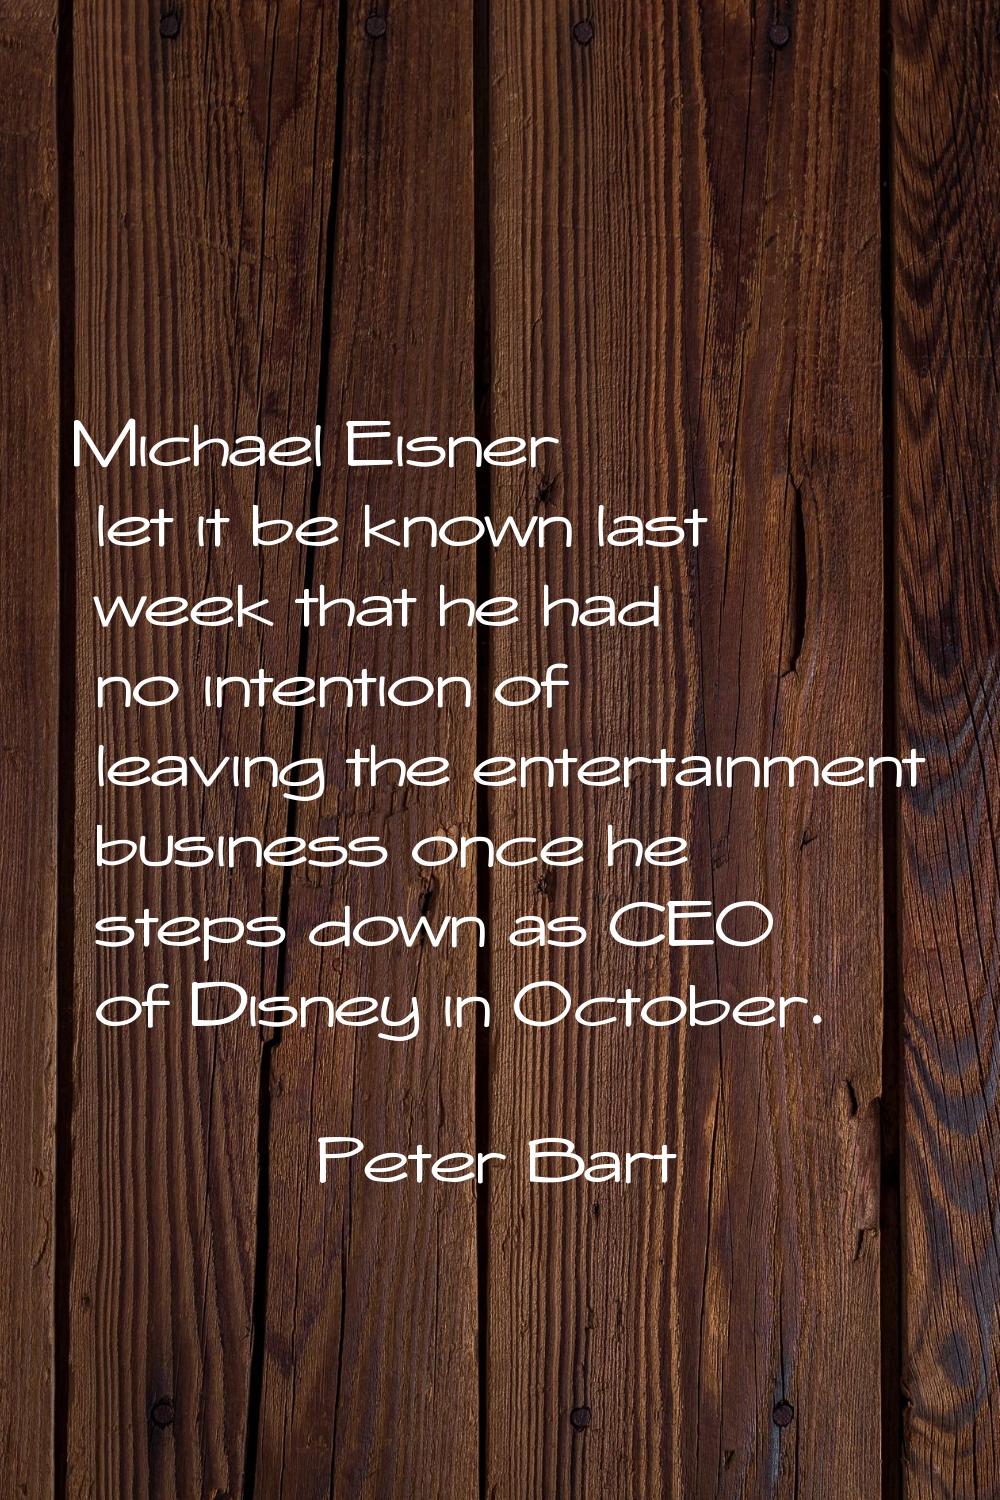 Michael Eisner let it be known last week that he had no intention of leaving the entertainment busi